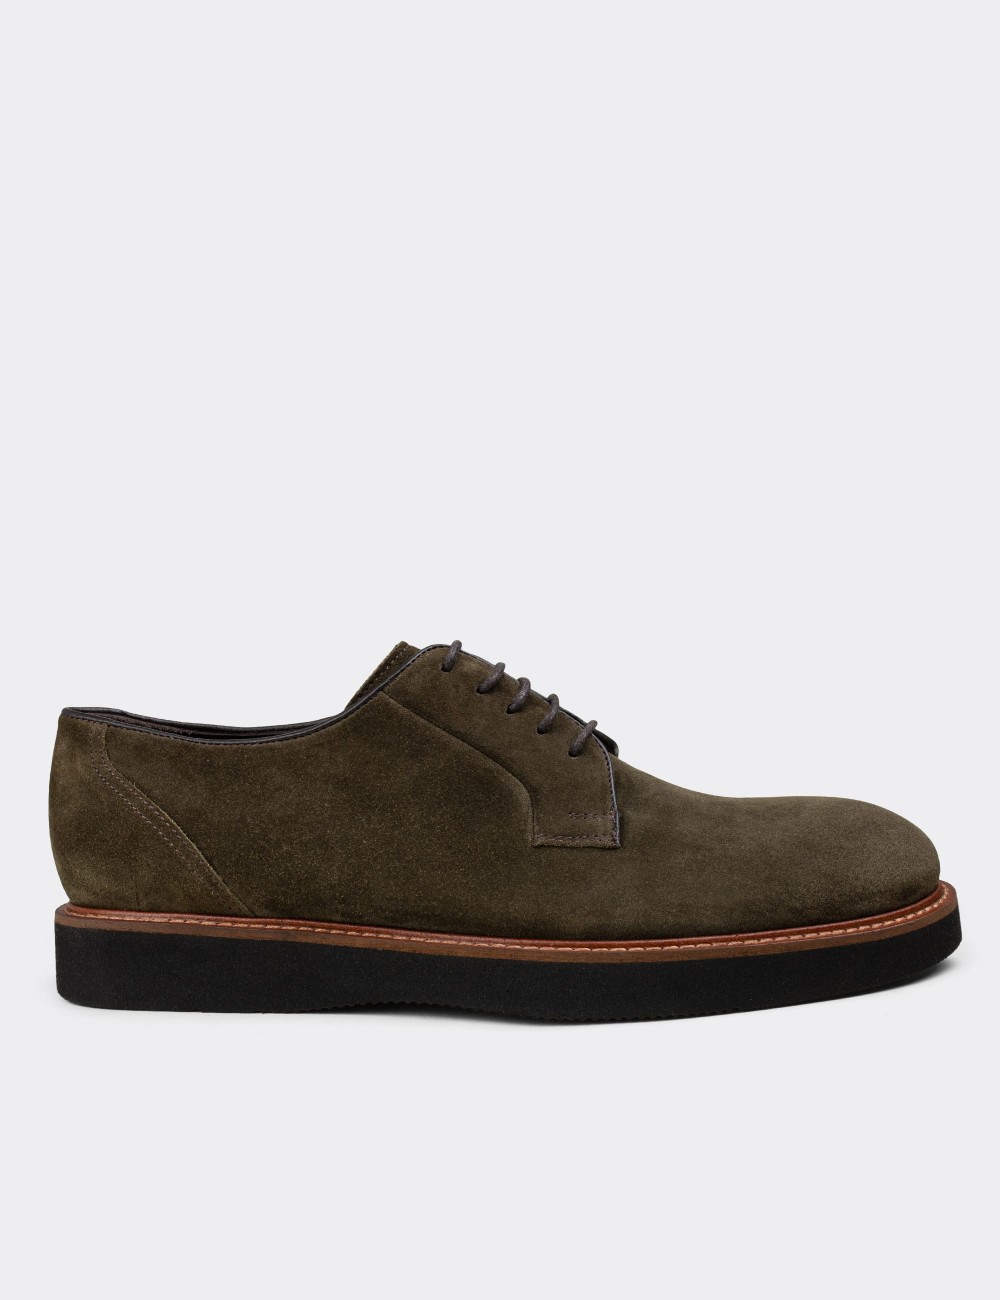 Green Suede Leather Lace-up Shoes - 01090MHAKE01